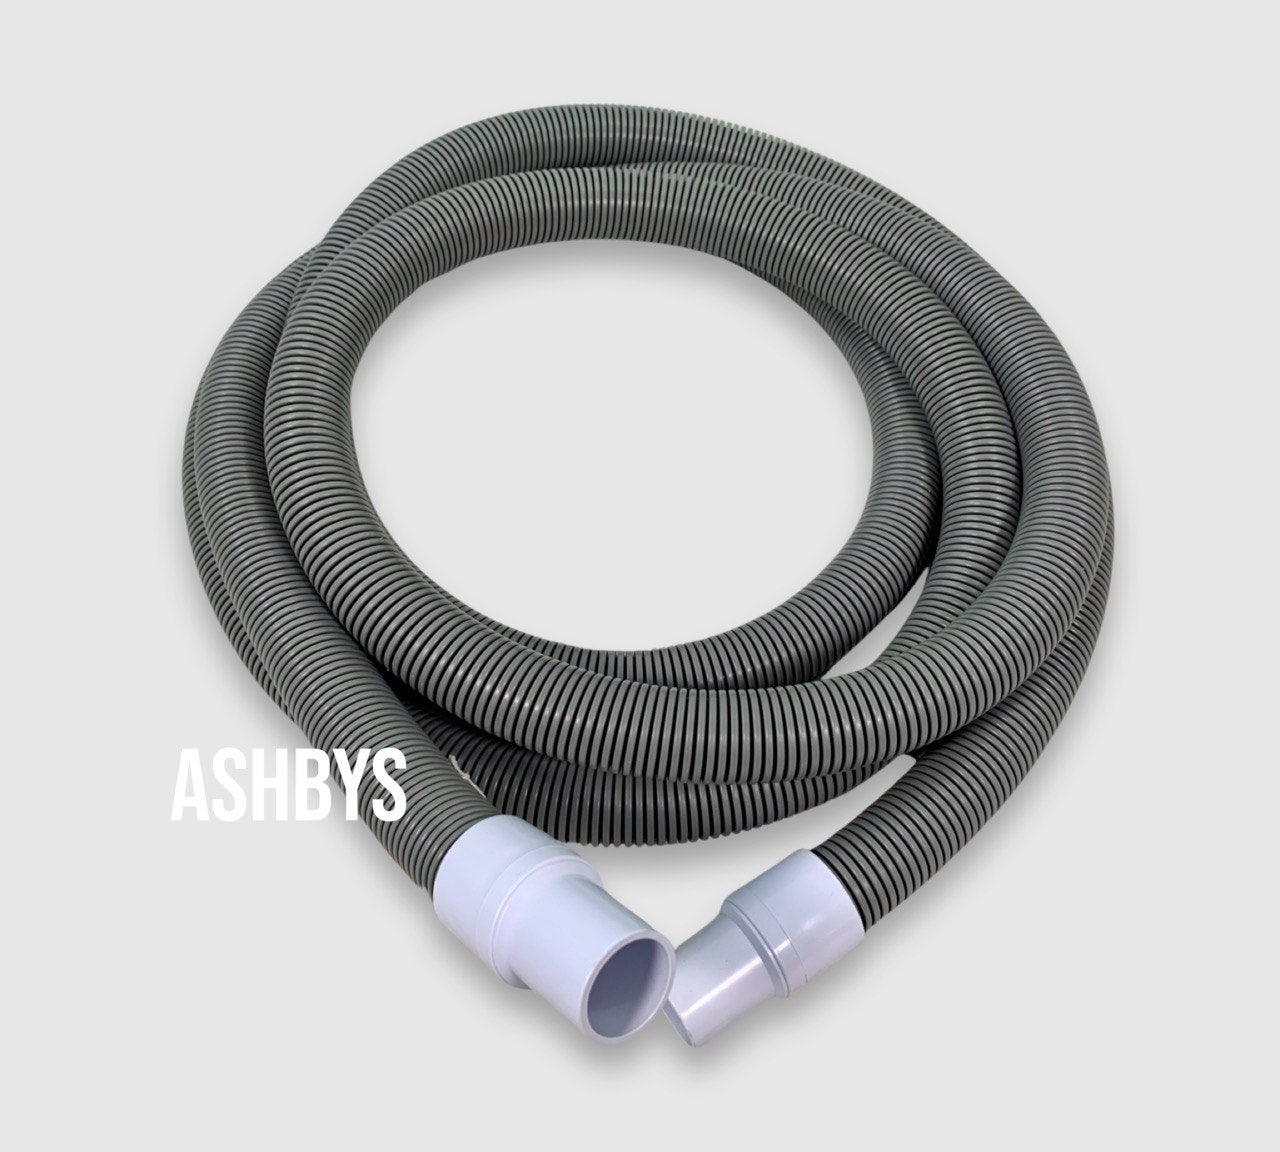 19ft (NOT 25FT) GREY 1.5 inch Vacuum Hose with 2 x Swivel 1.5 inch Hose Cuff ONLY - CLEARANCE